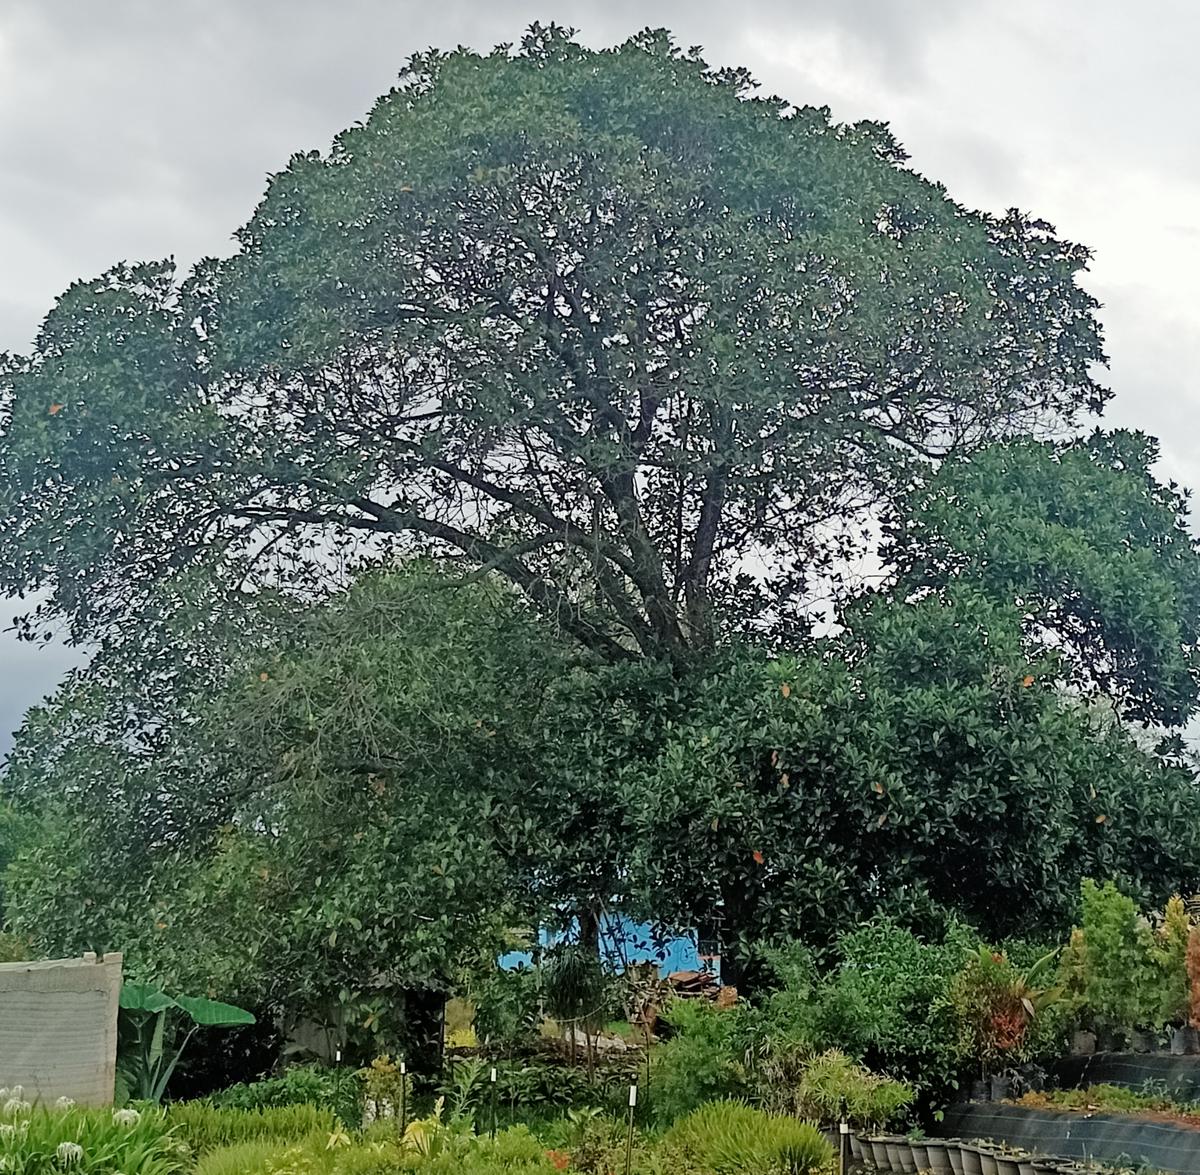 The new variety was identified in the field of Nagaraj in Hessarghatta on Bengaluru’s outskirts. Presently there is only one such tree in his field.